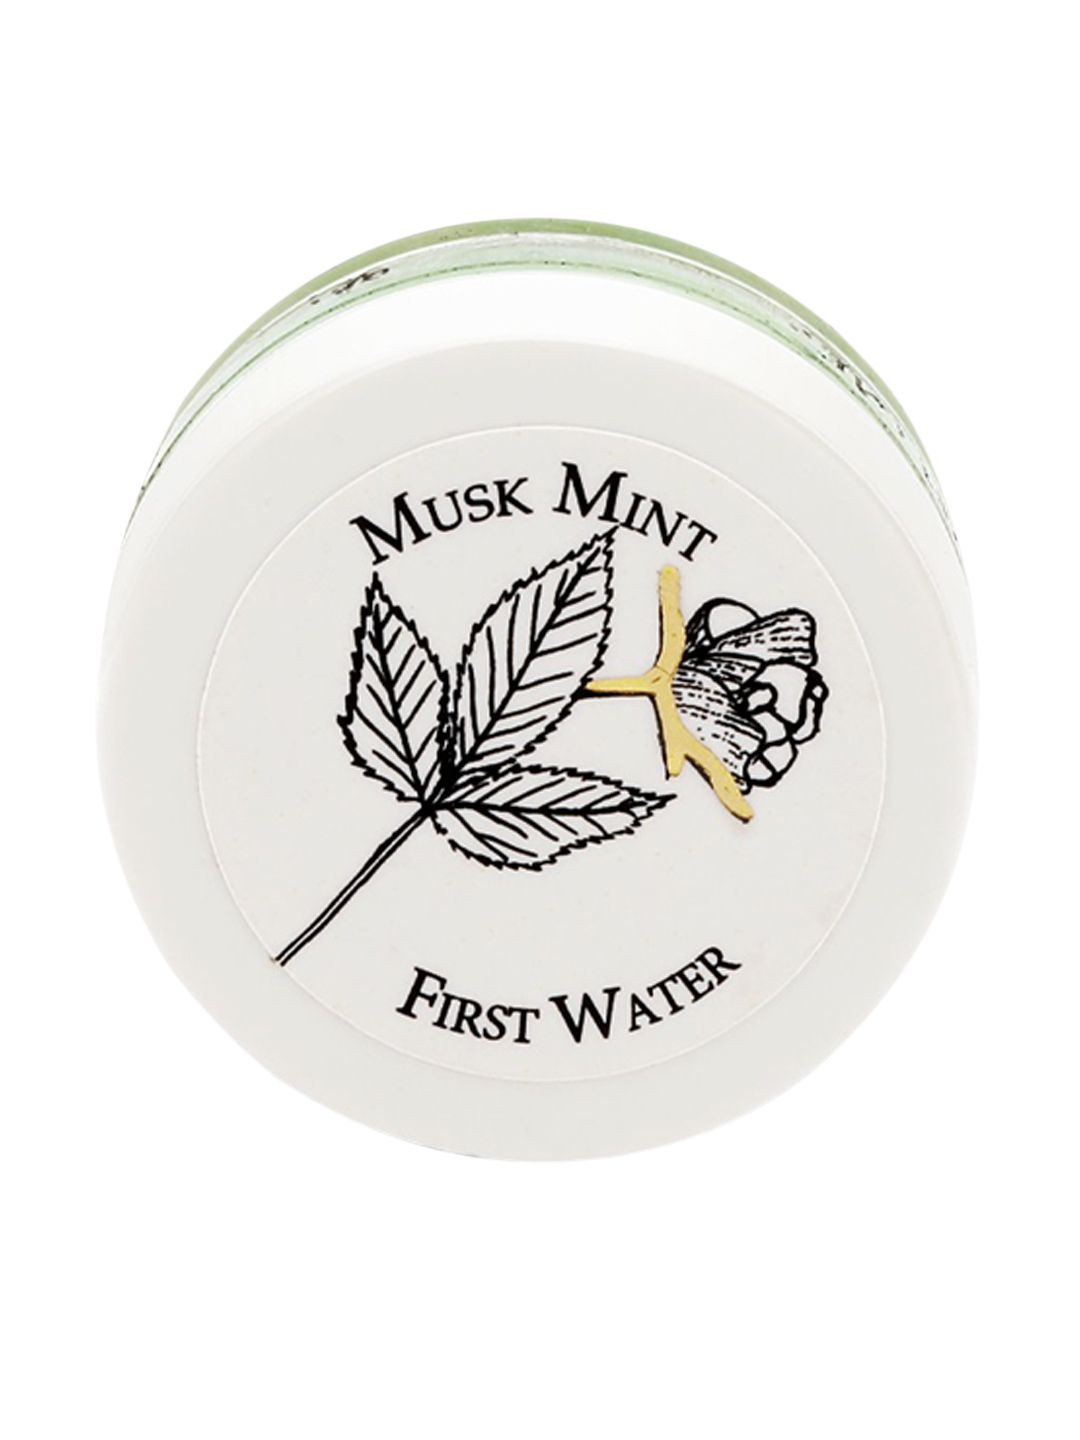 FIRST WATER Musk Mint Solid Perfume - 10 ml Price in India